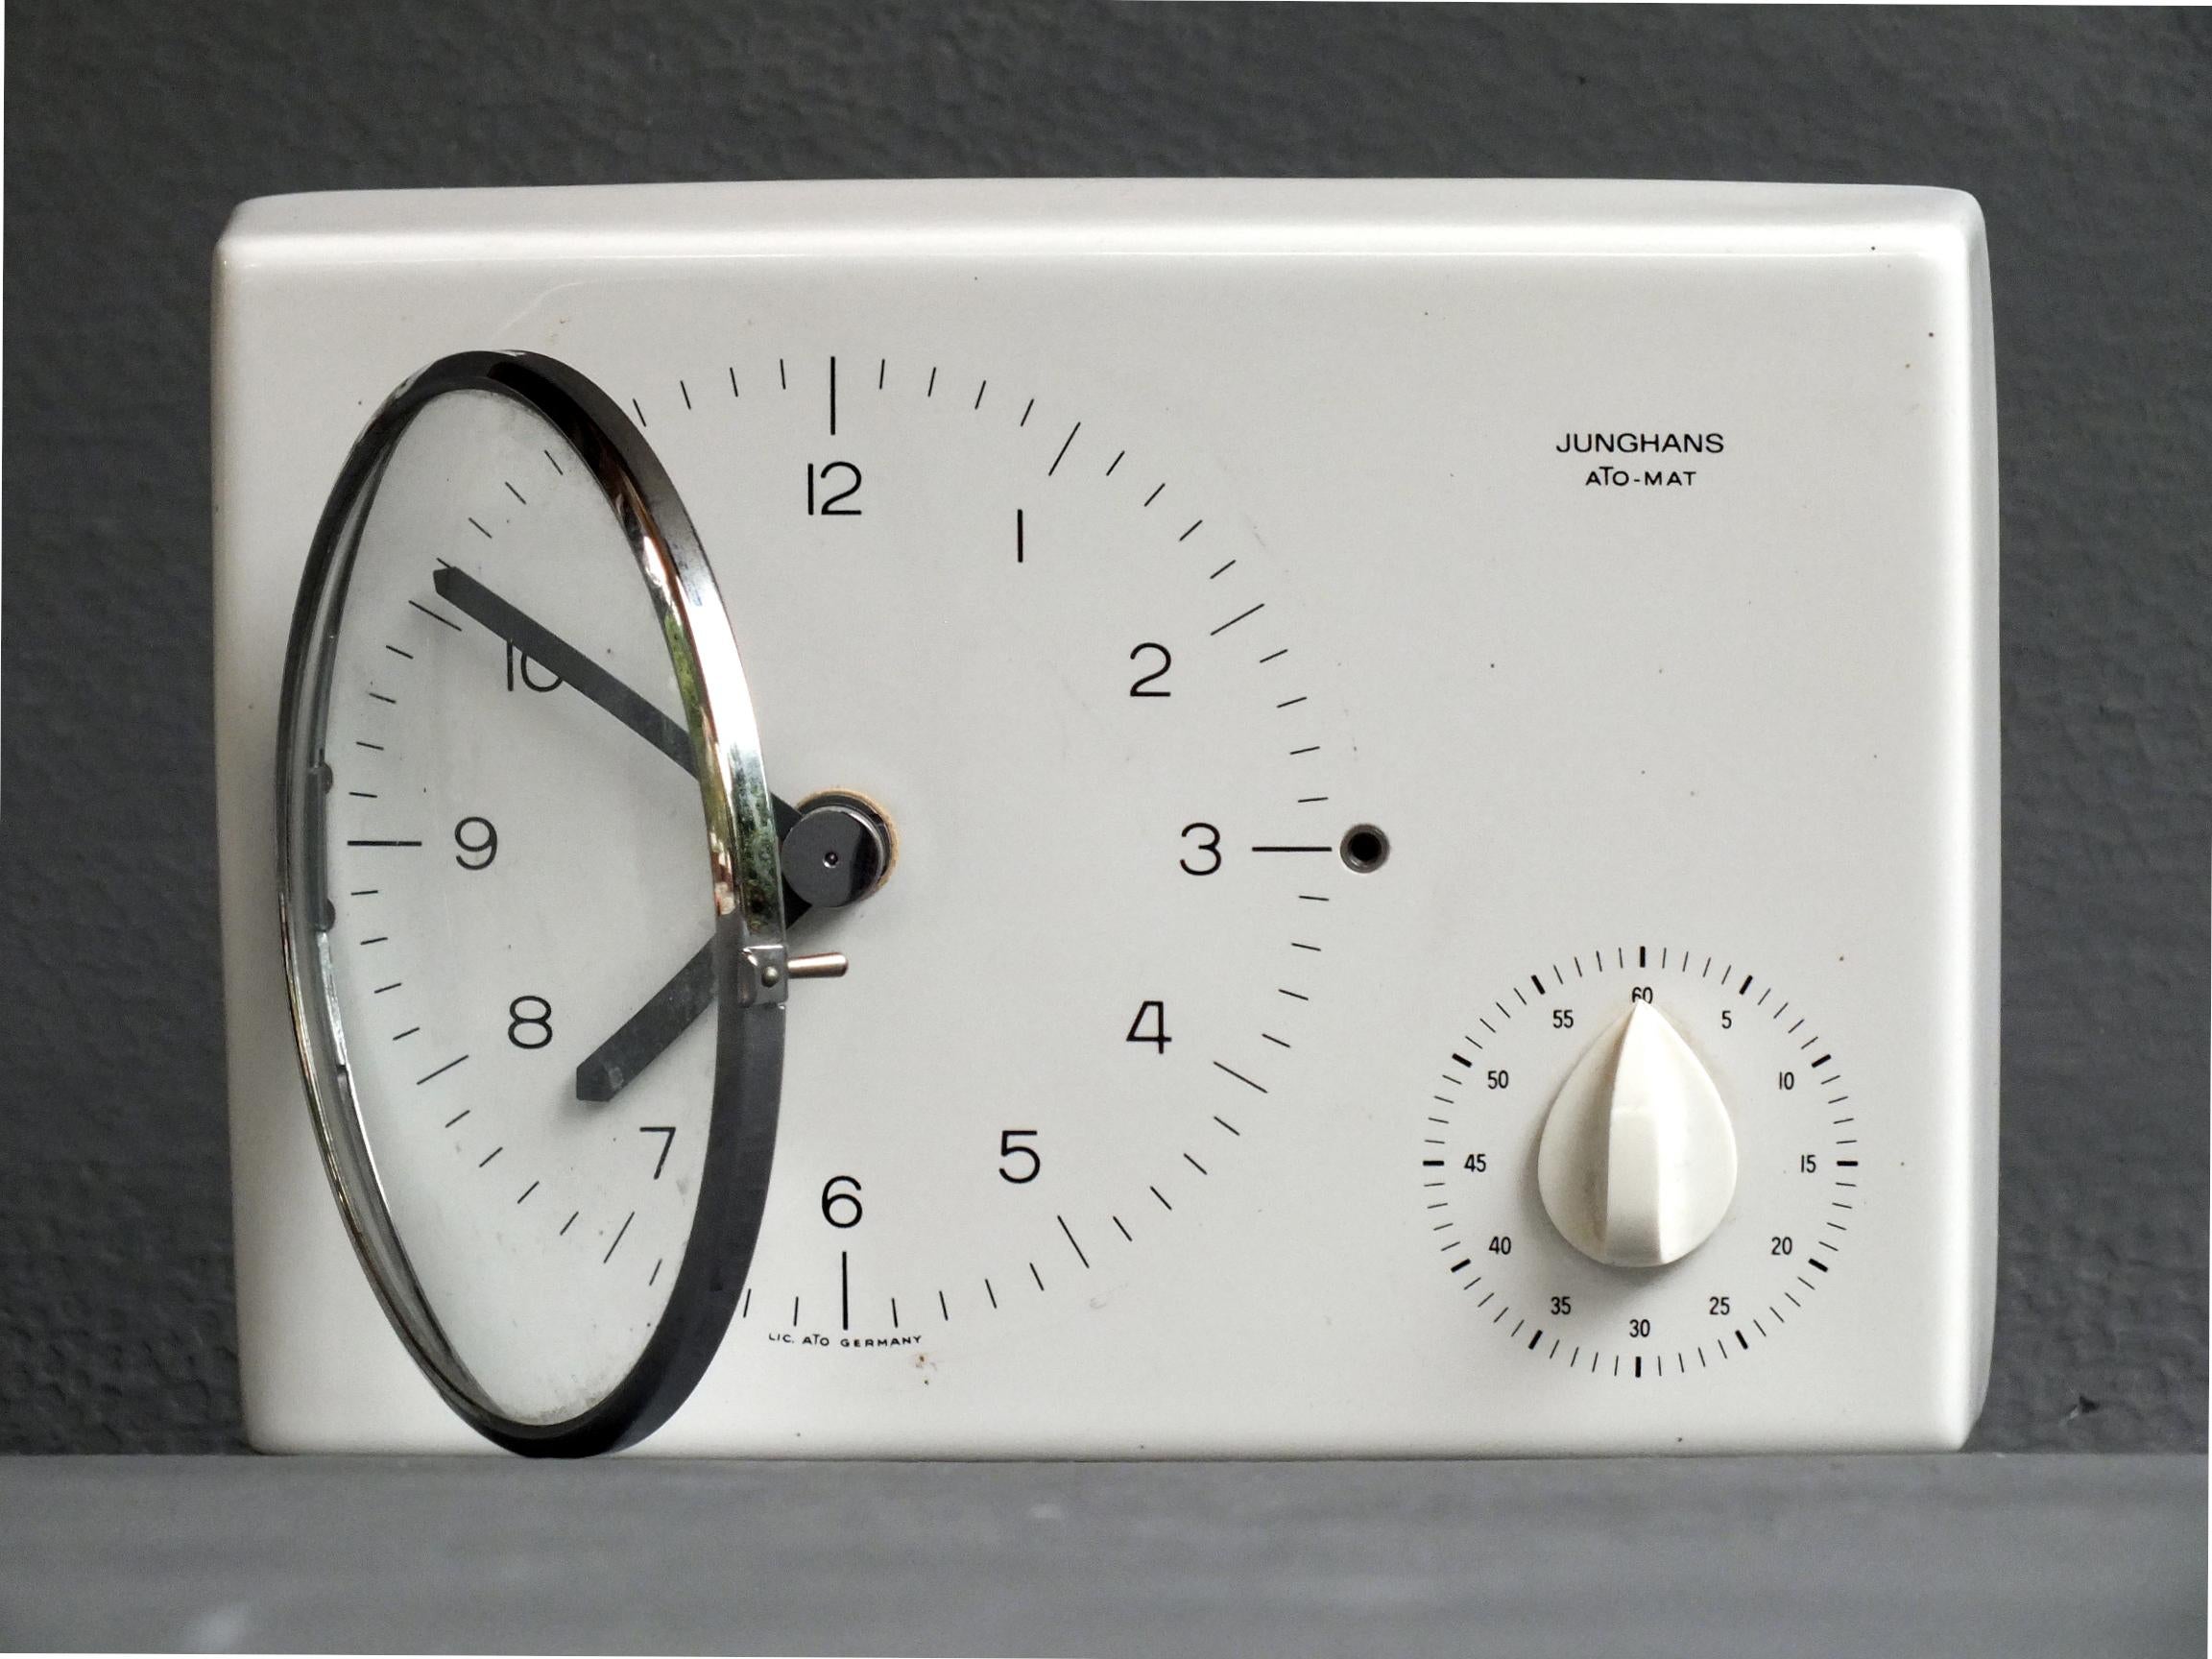 Max Bill design years '60 for Junghans wall clock ato-mat first edit with electro/mechanical movement

 the clock is in ceramic metal and plastic, in good condition and very rare..

 white color ,measure 22 cm x15 x 5 - 8 x 6 x 2 inches,

the